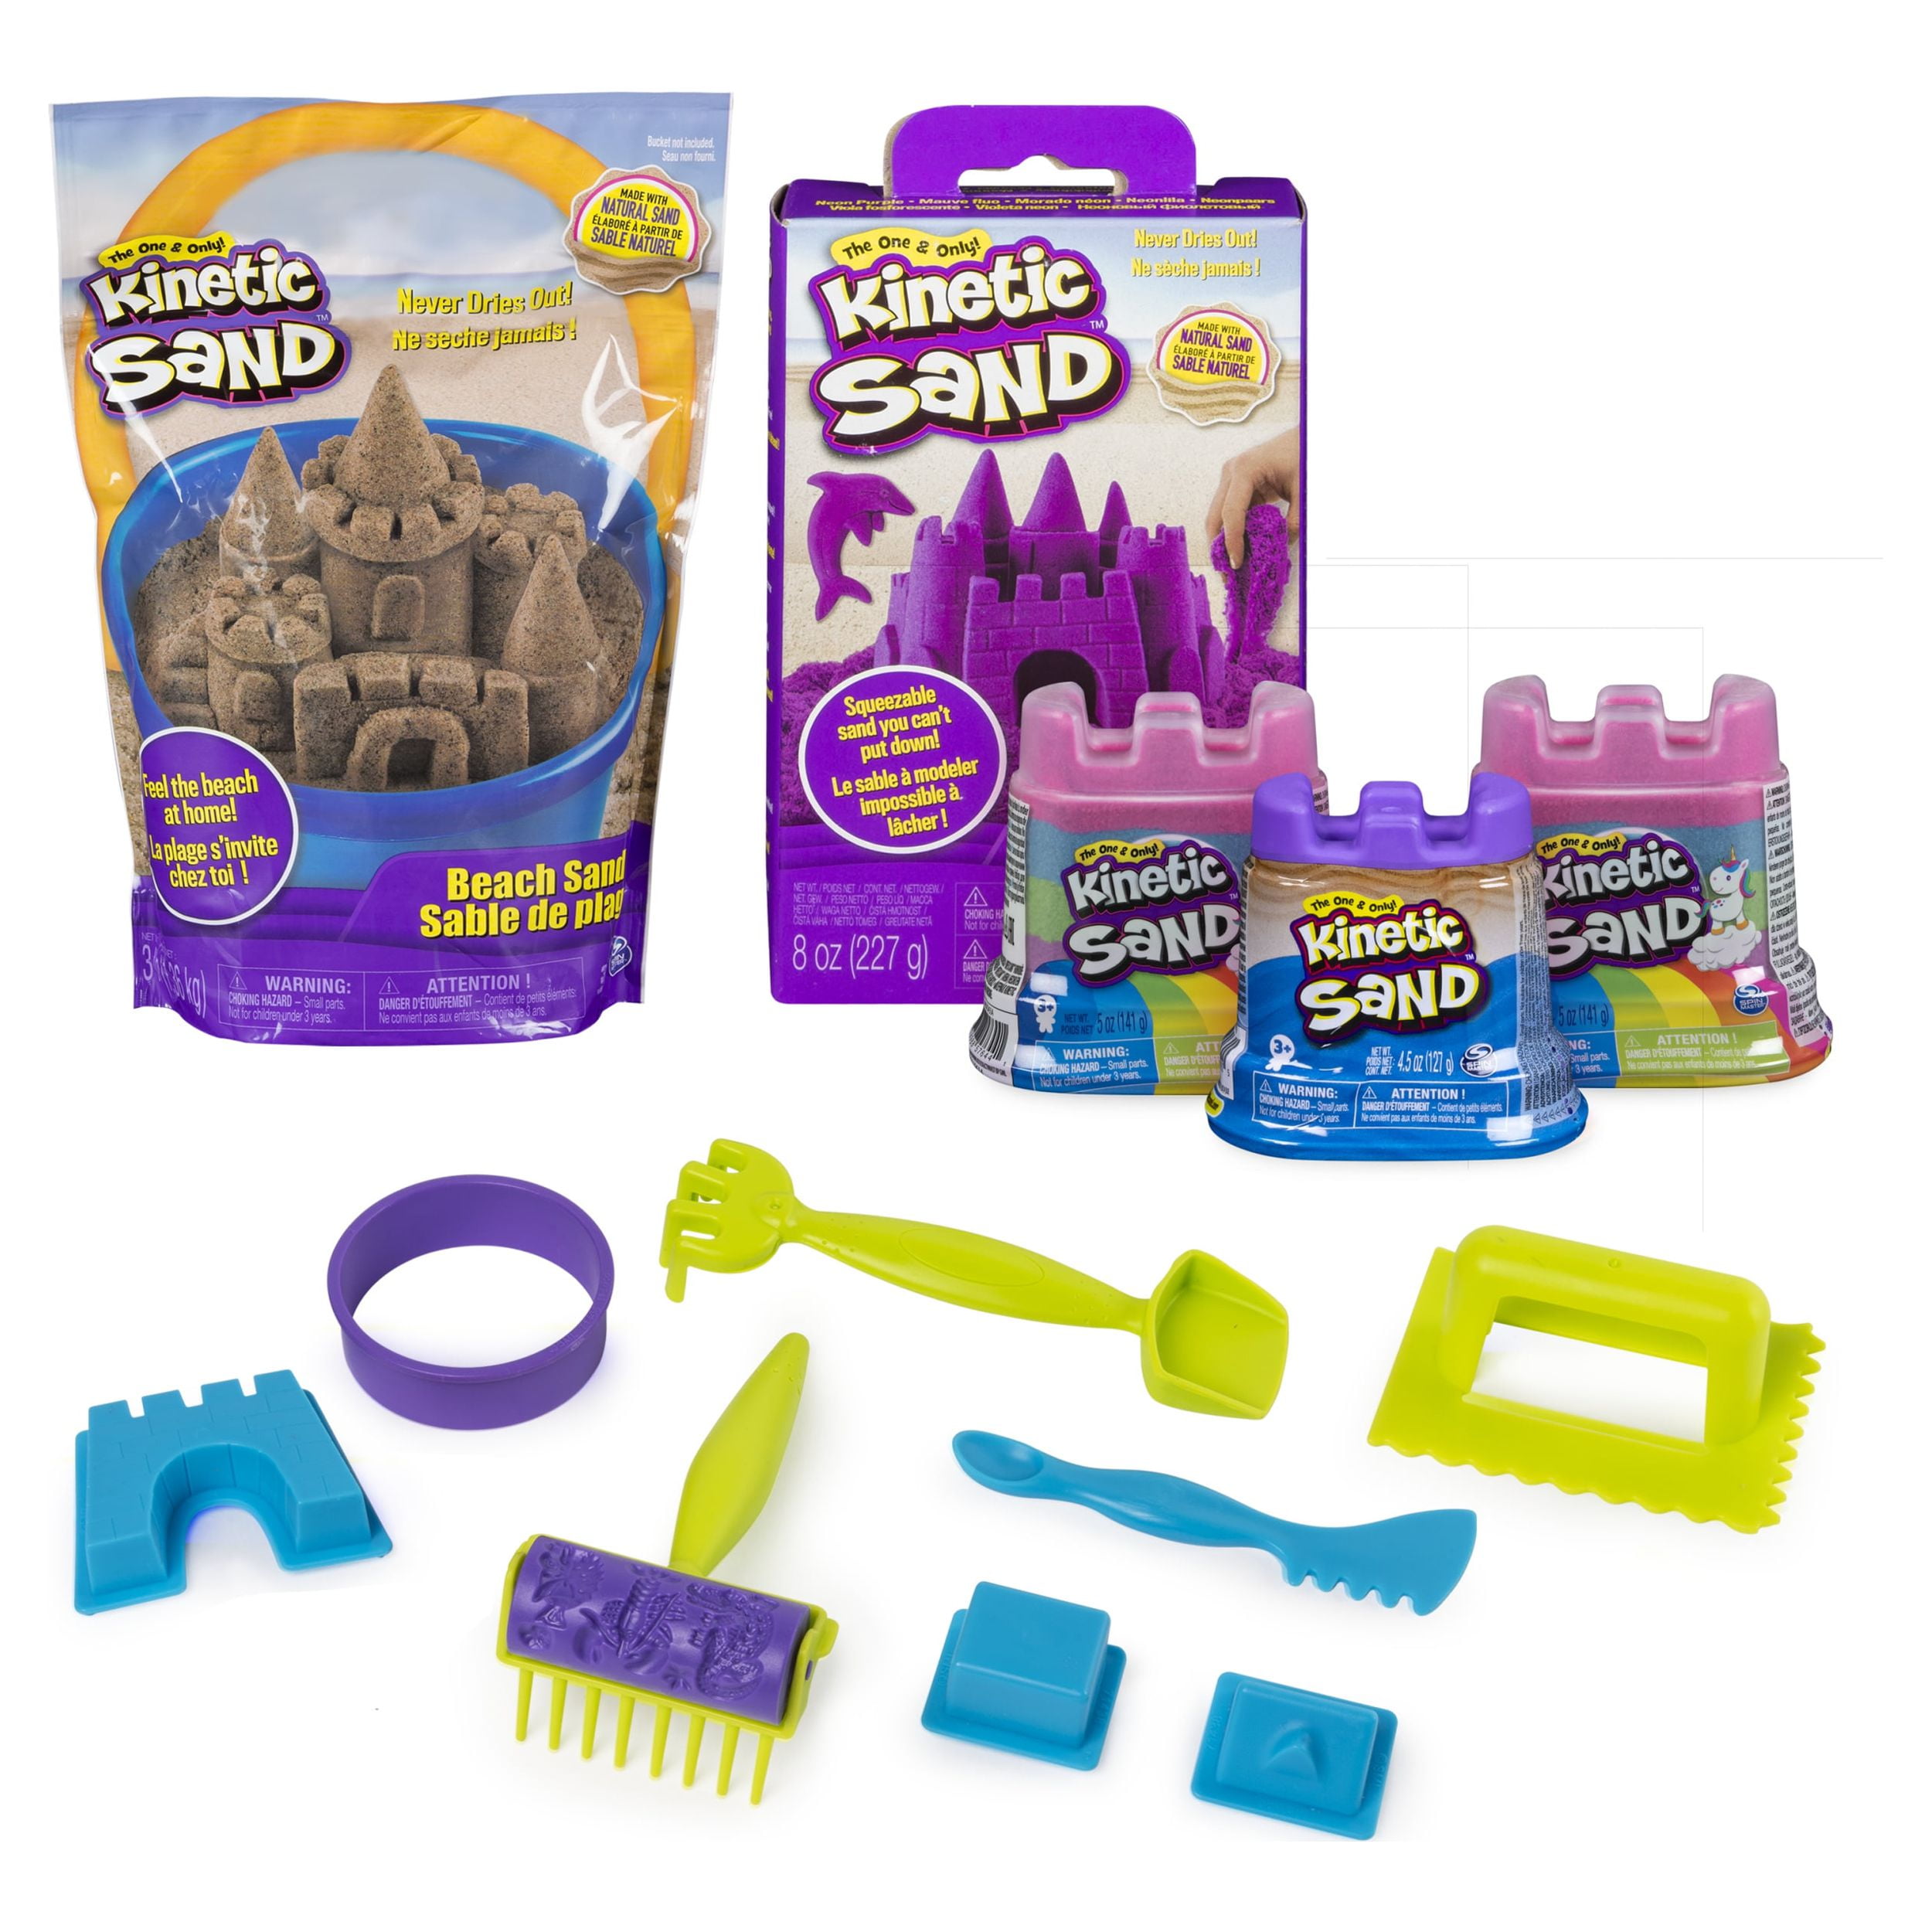  Kinetic Sand Single Container Purple Building Kit : Toys & Games